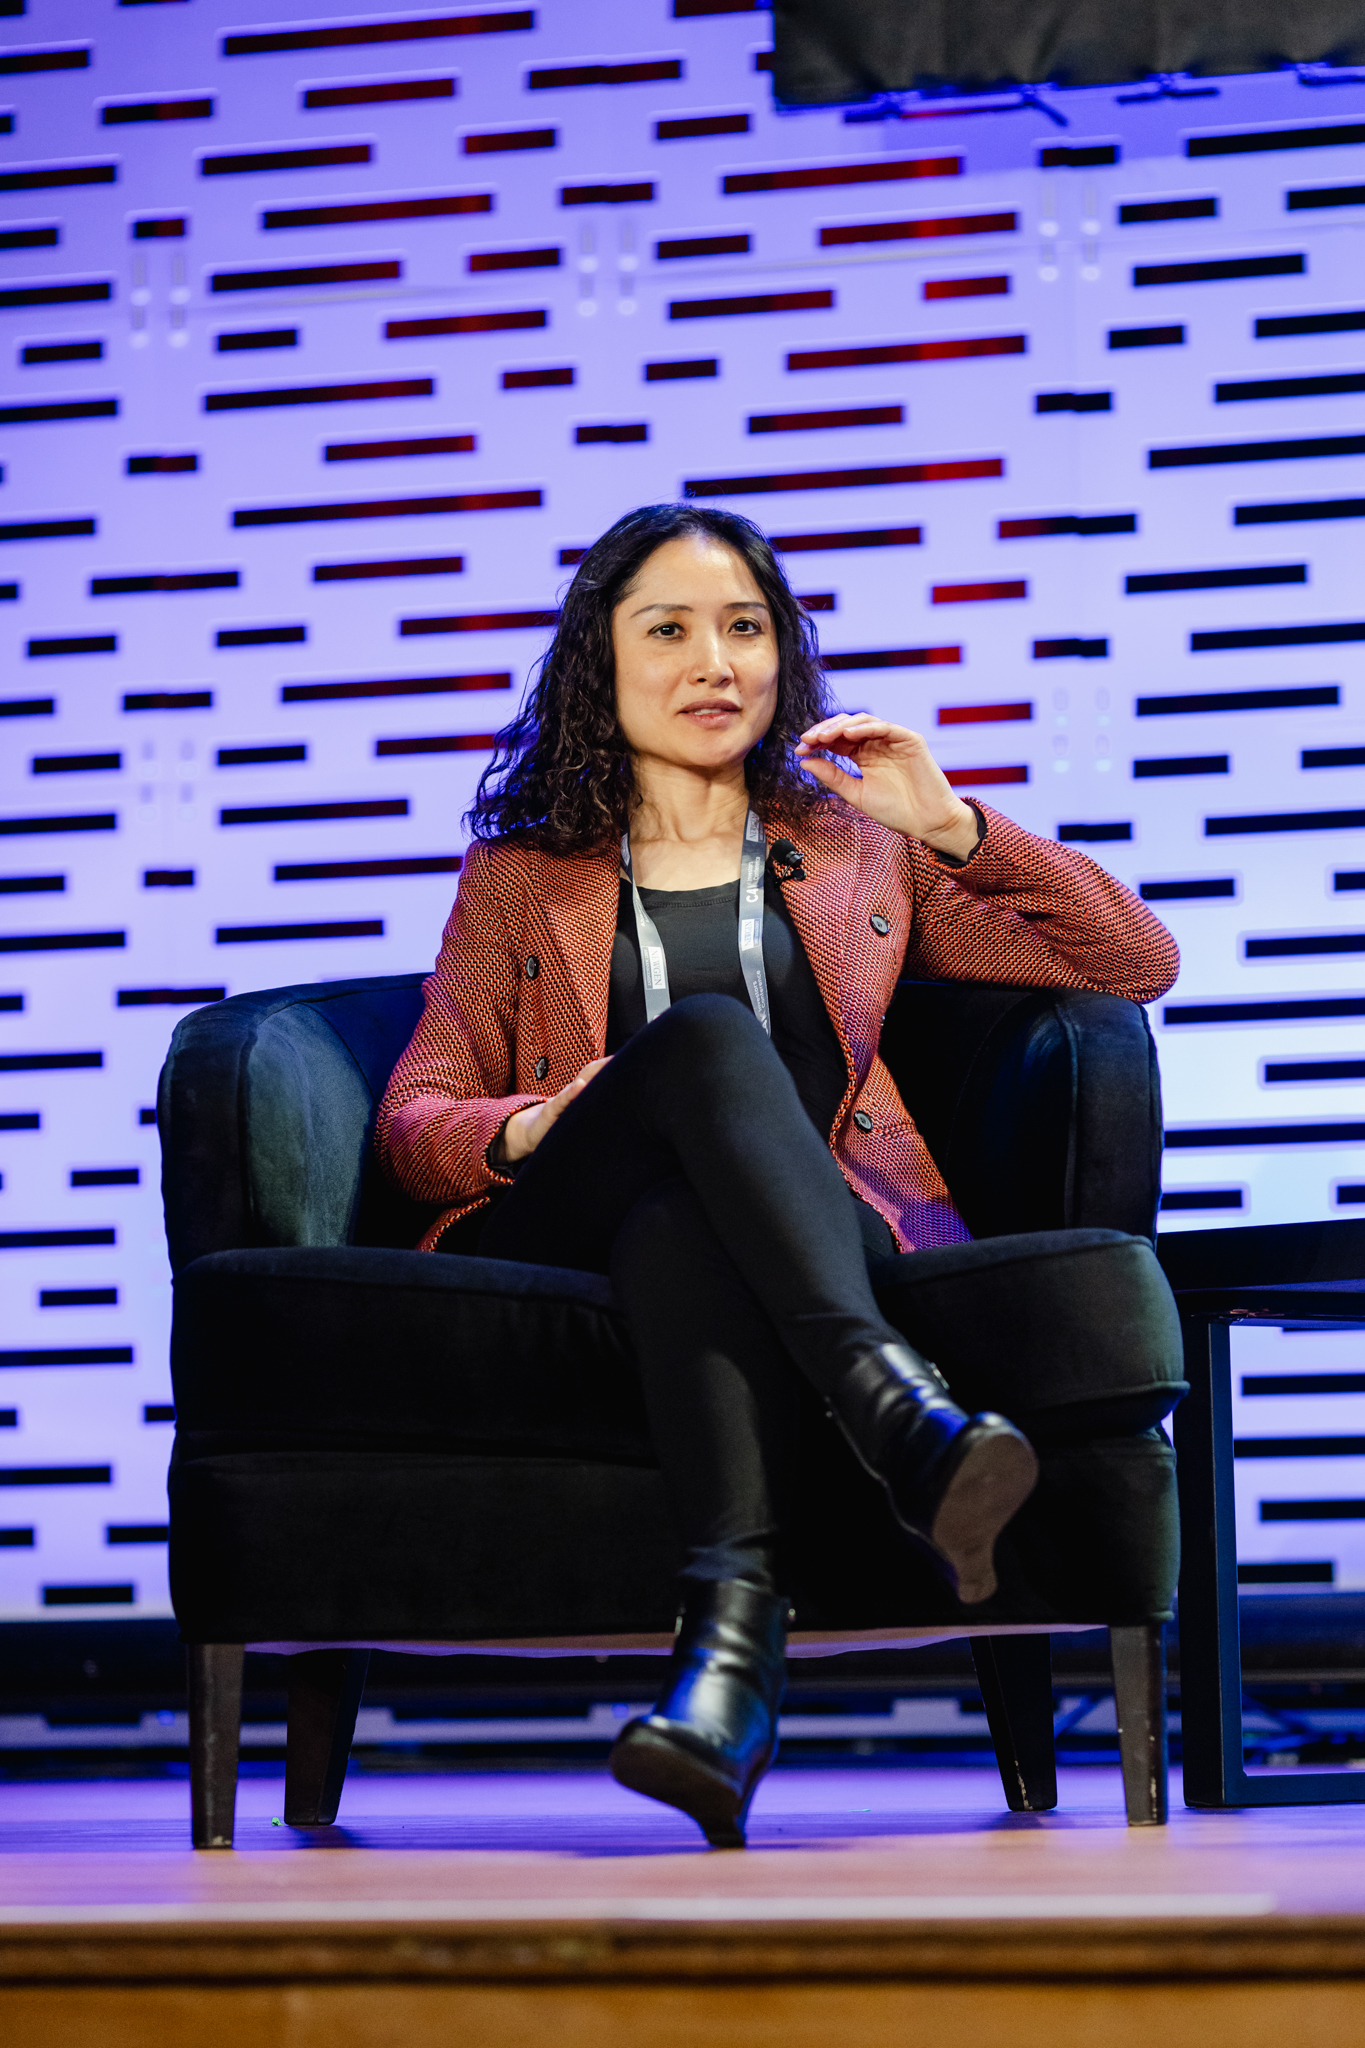 A woman sitting in a chair on stage at a conference.